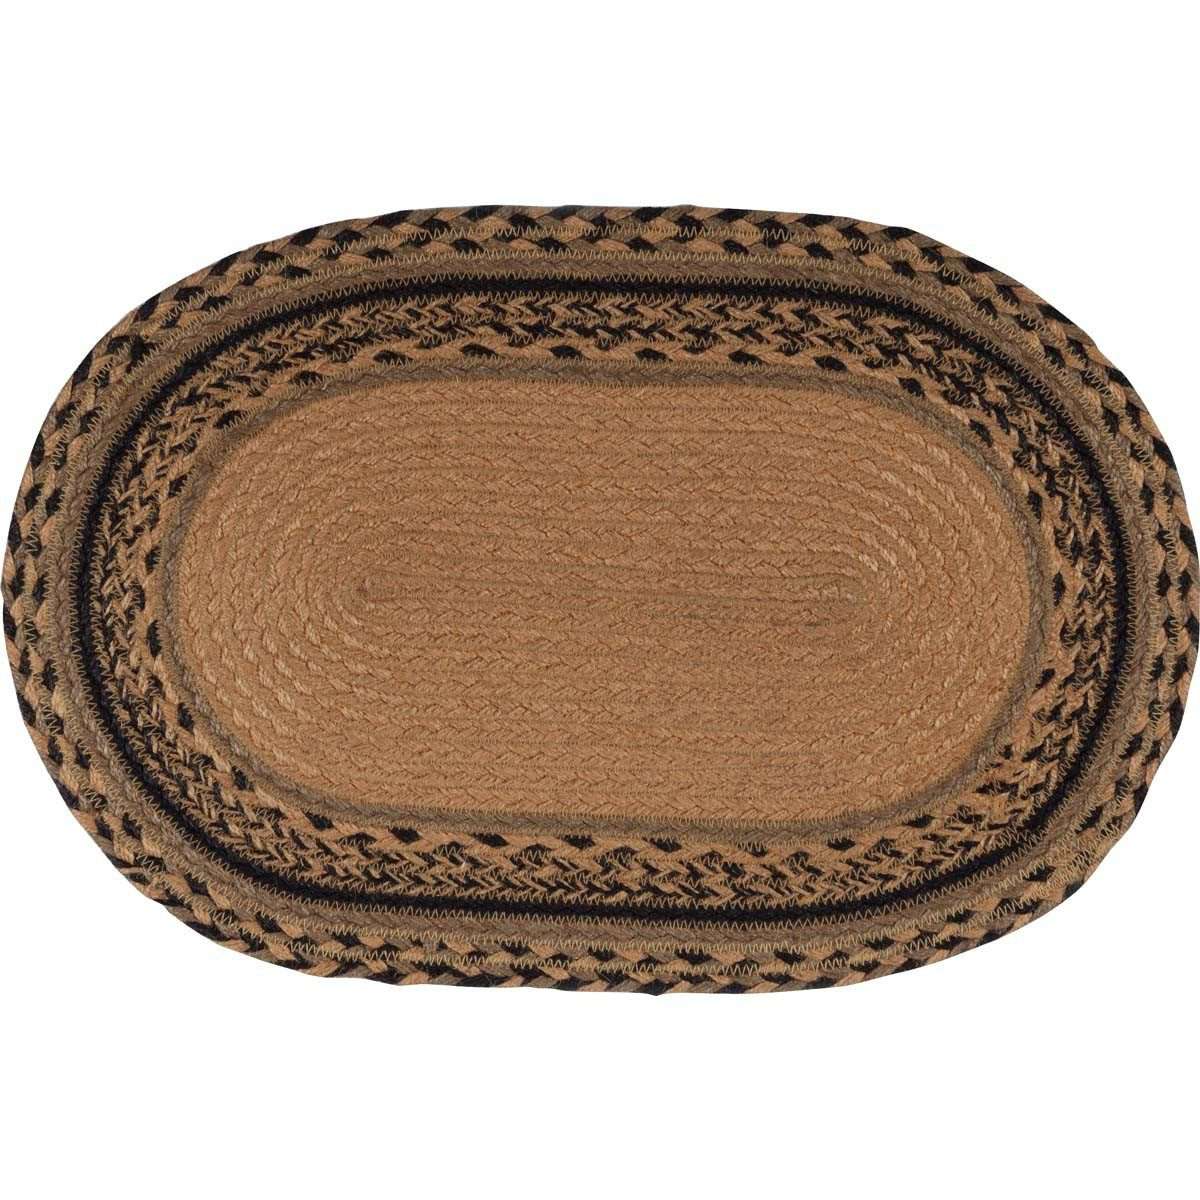 Trophy Mount Jute Braided Placemats Set of 6 - The Fox Decor